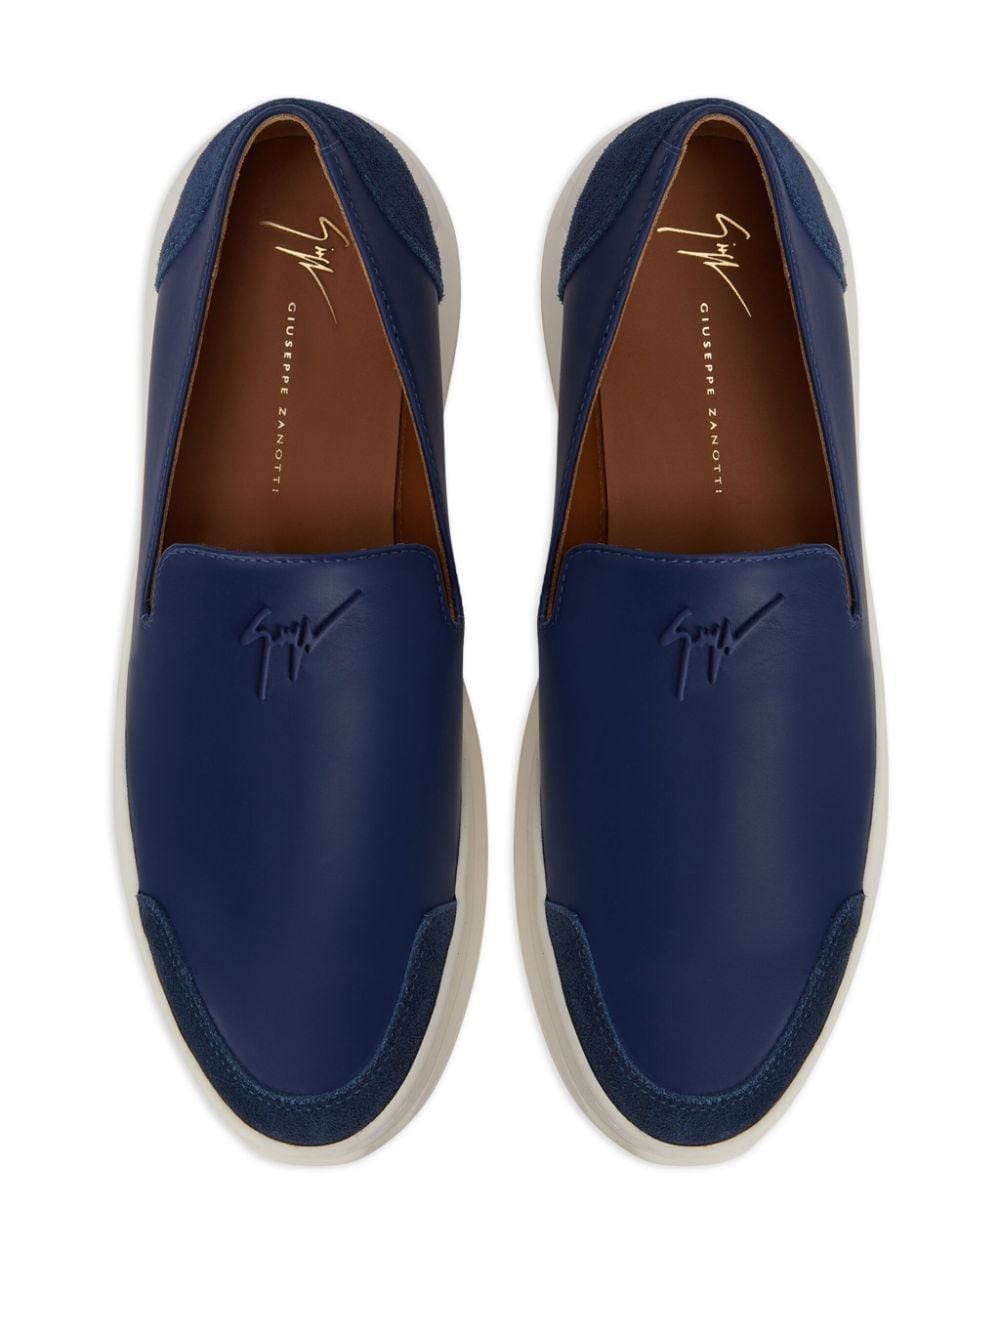 Conley leather loafers - 4